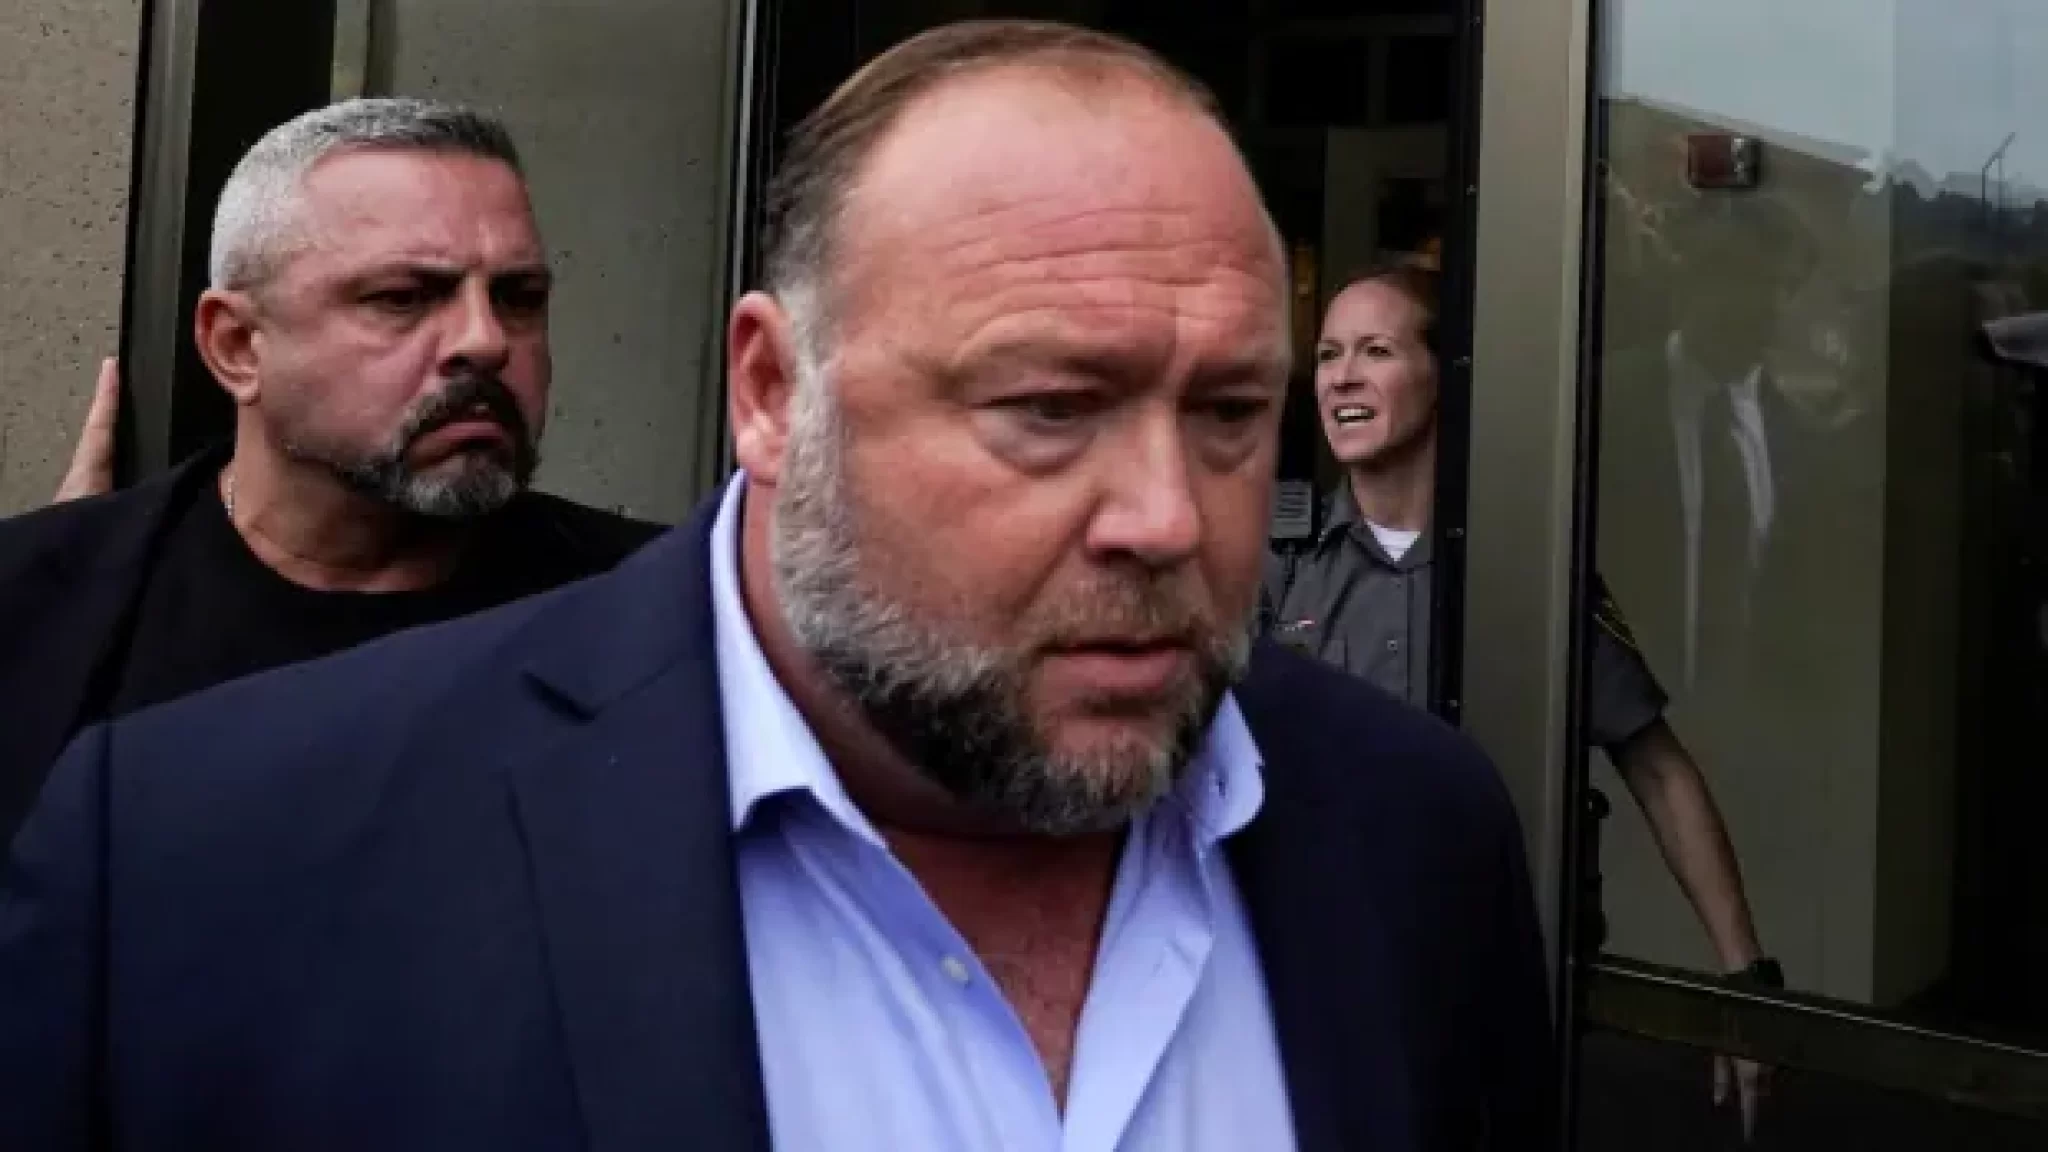 Sandy Hook parents in Connecticut finally get to see Alex Jones on the witness stand